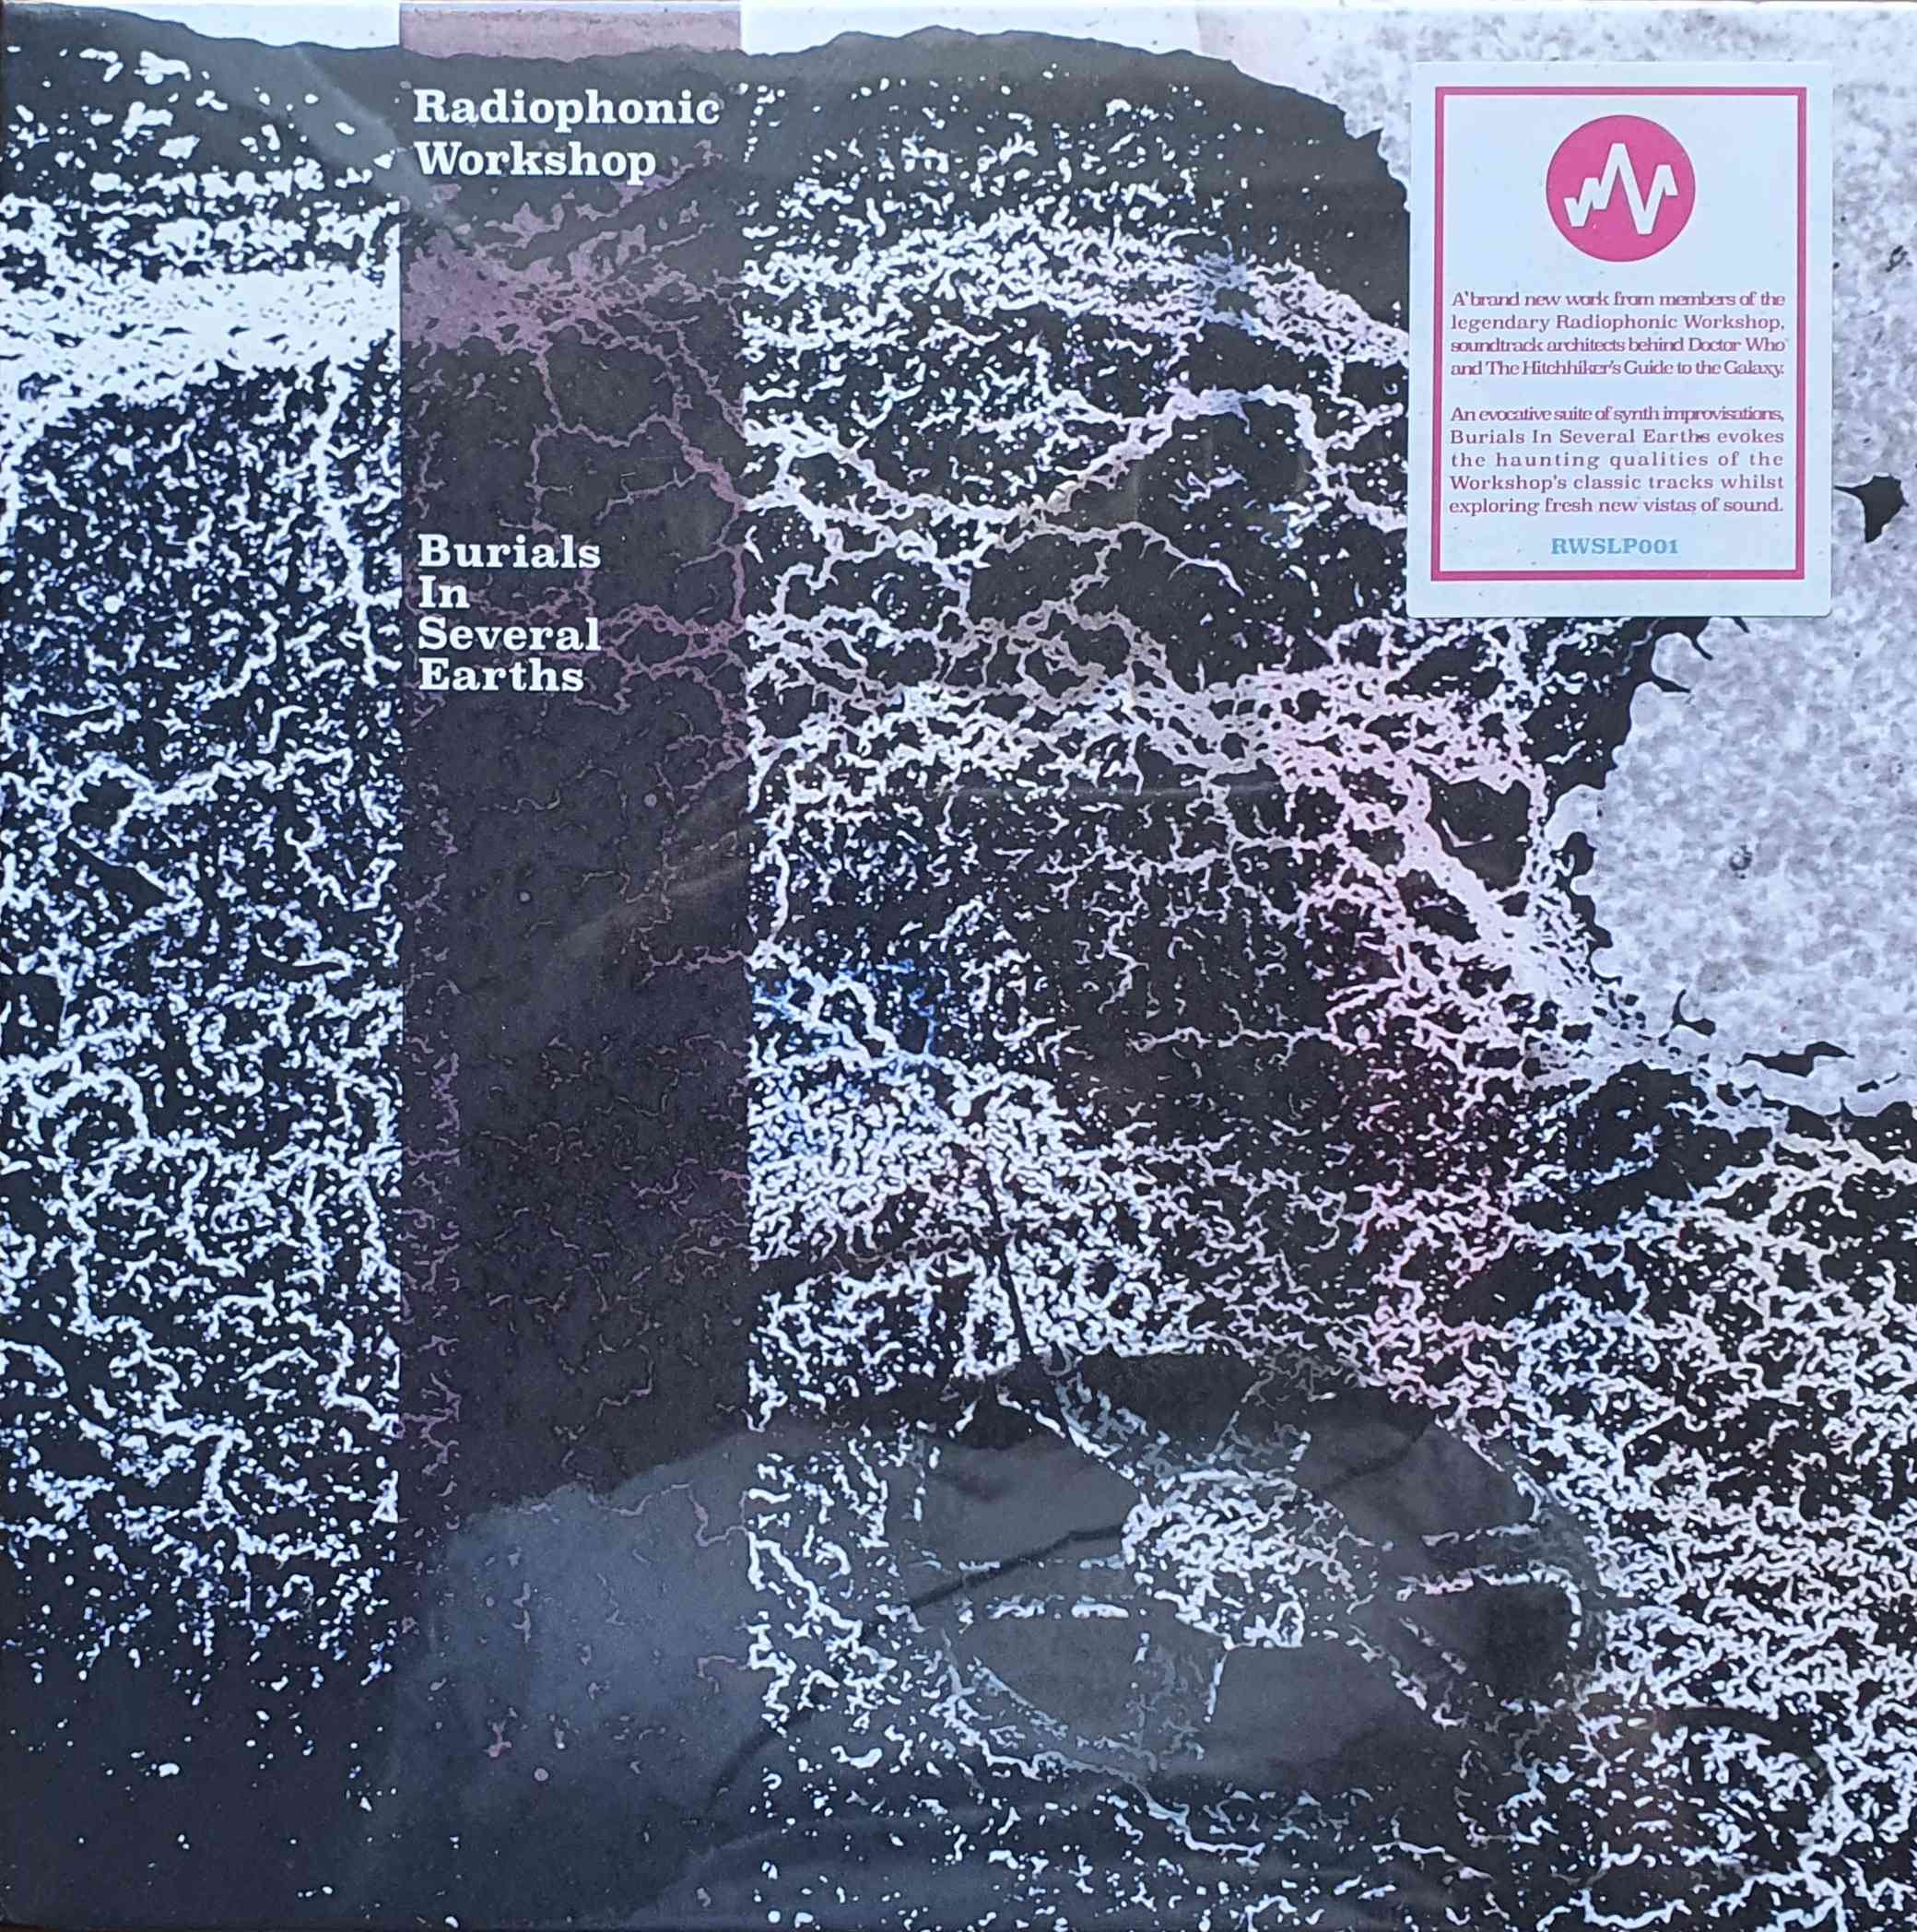 Picture of RWSLP 001 Burials in several Earths - Limited edition by artist Radiophonic Workshop from ITV, Channel 4 and Channel 5 10inches library